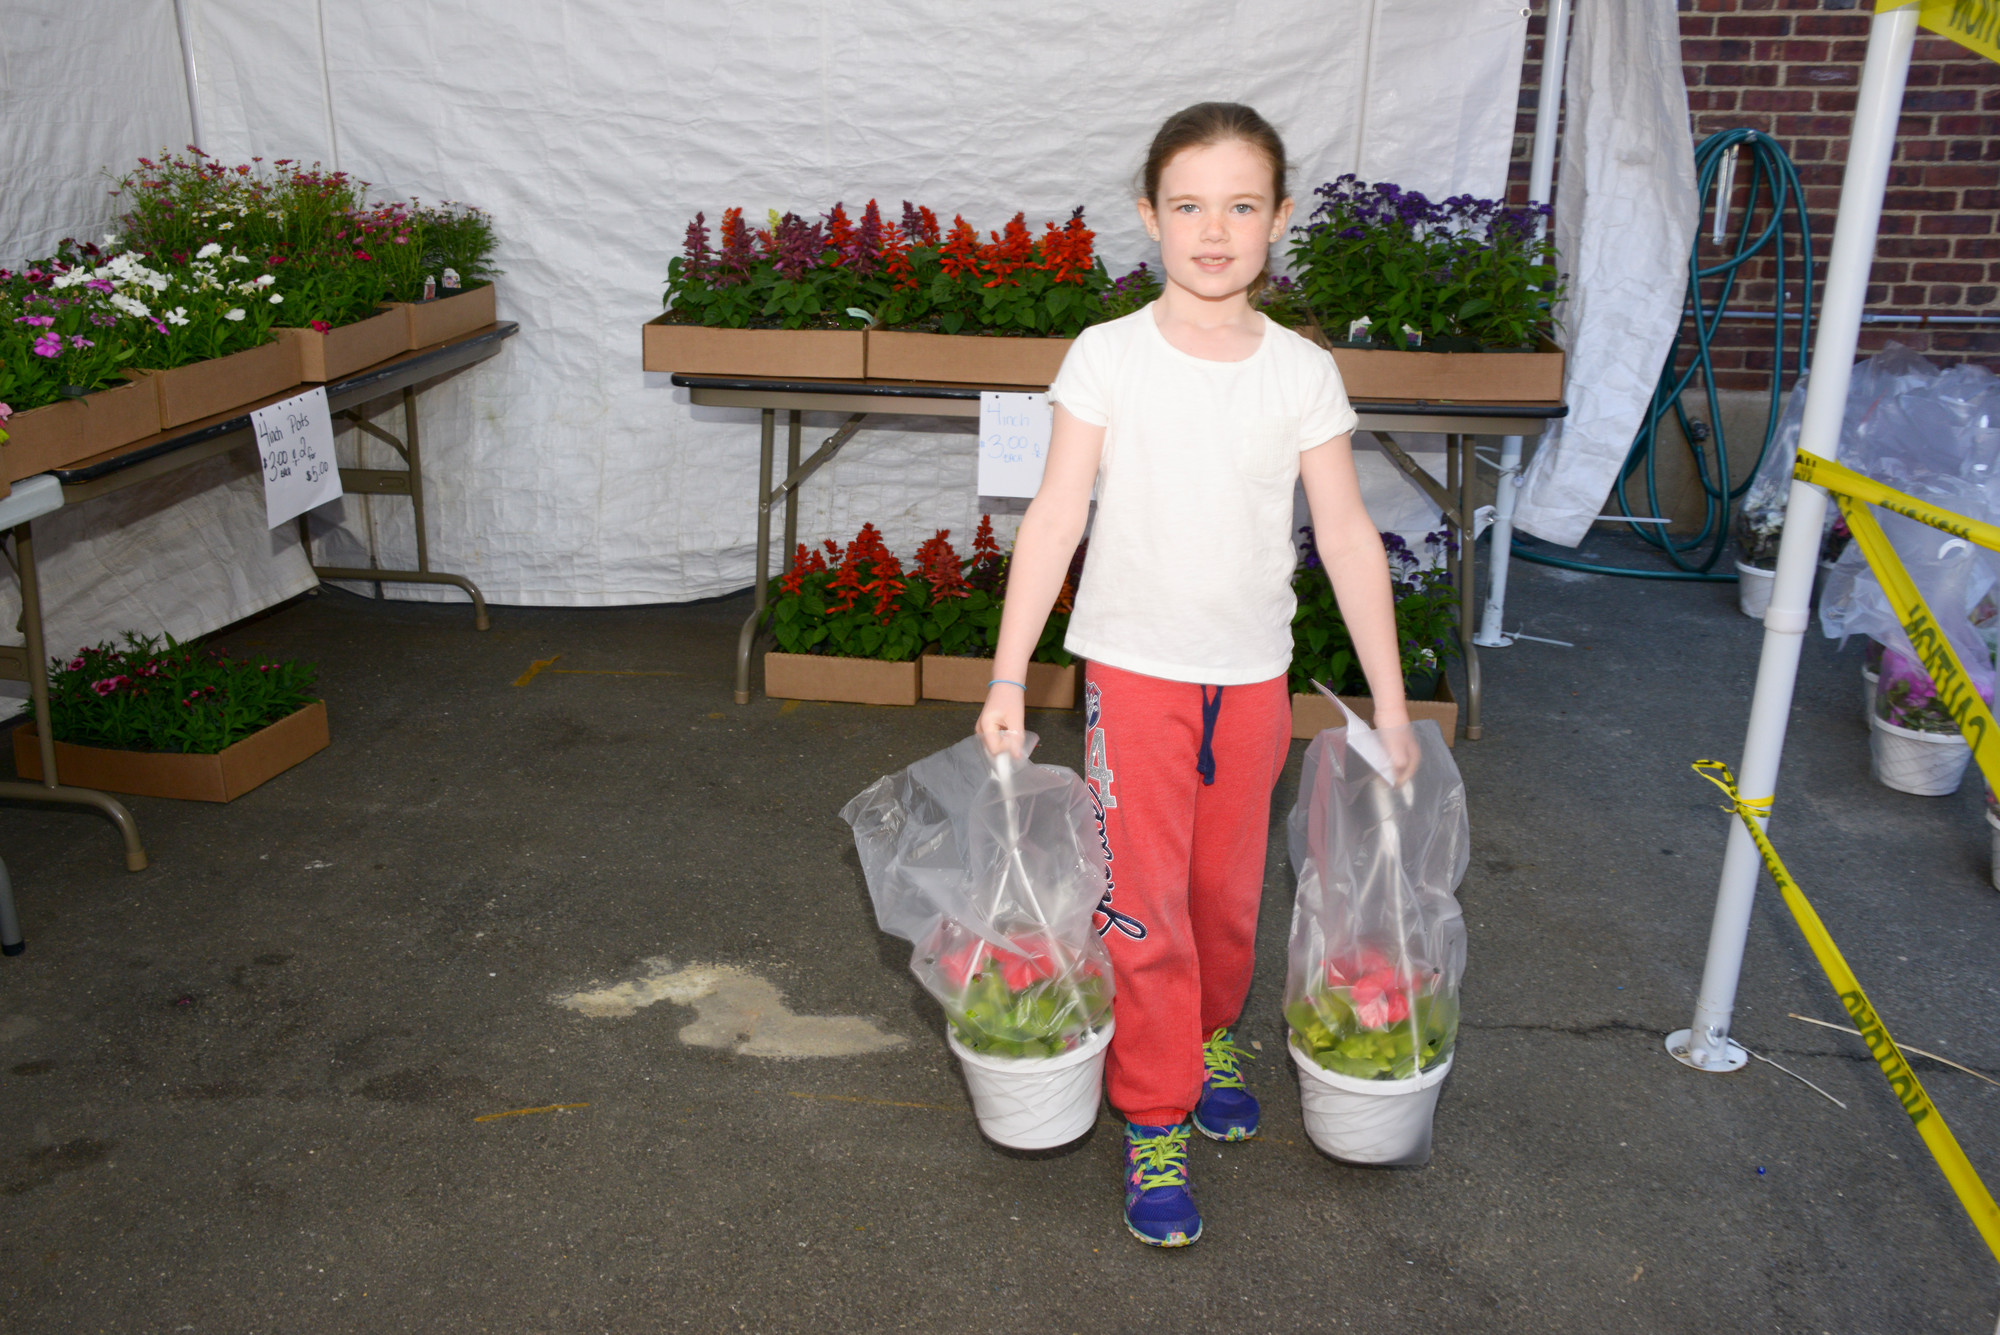 Kayla McDonough shopped for Mother’s Day plants at the Hegarty school plant sale in Island Park.